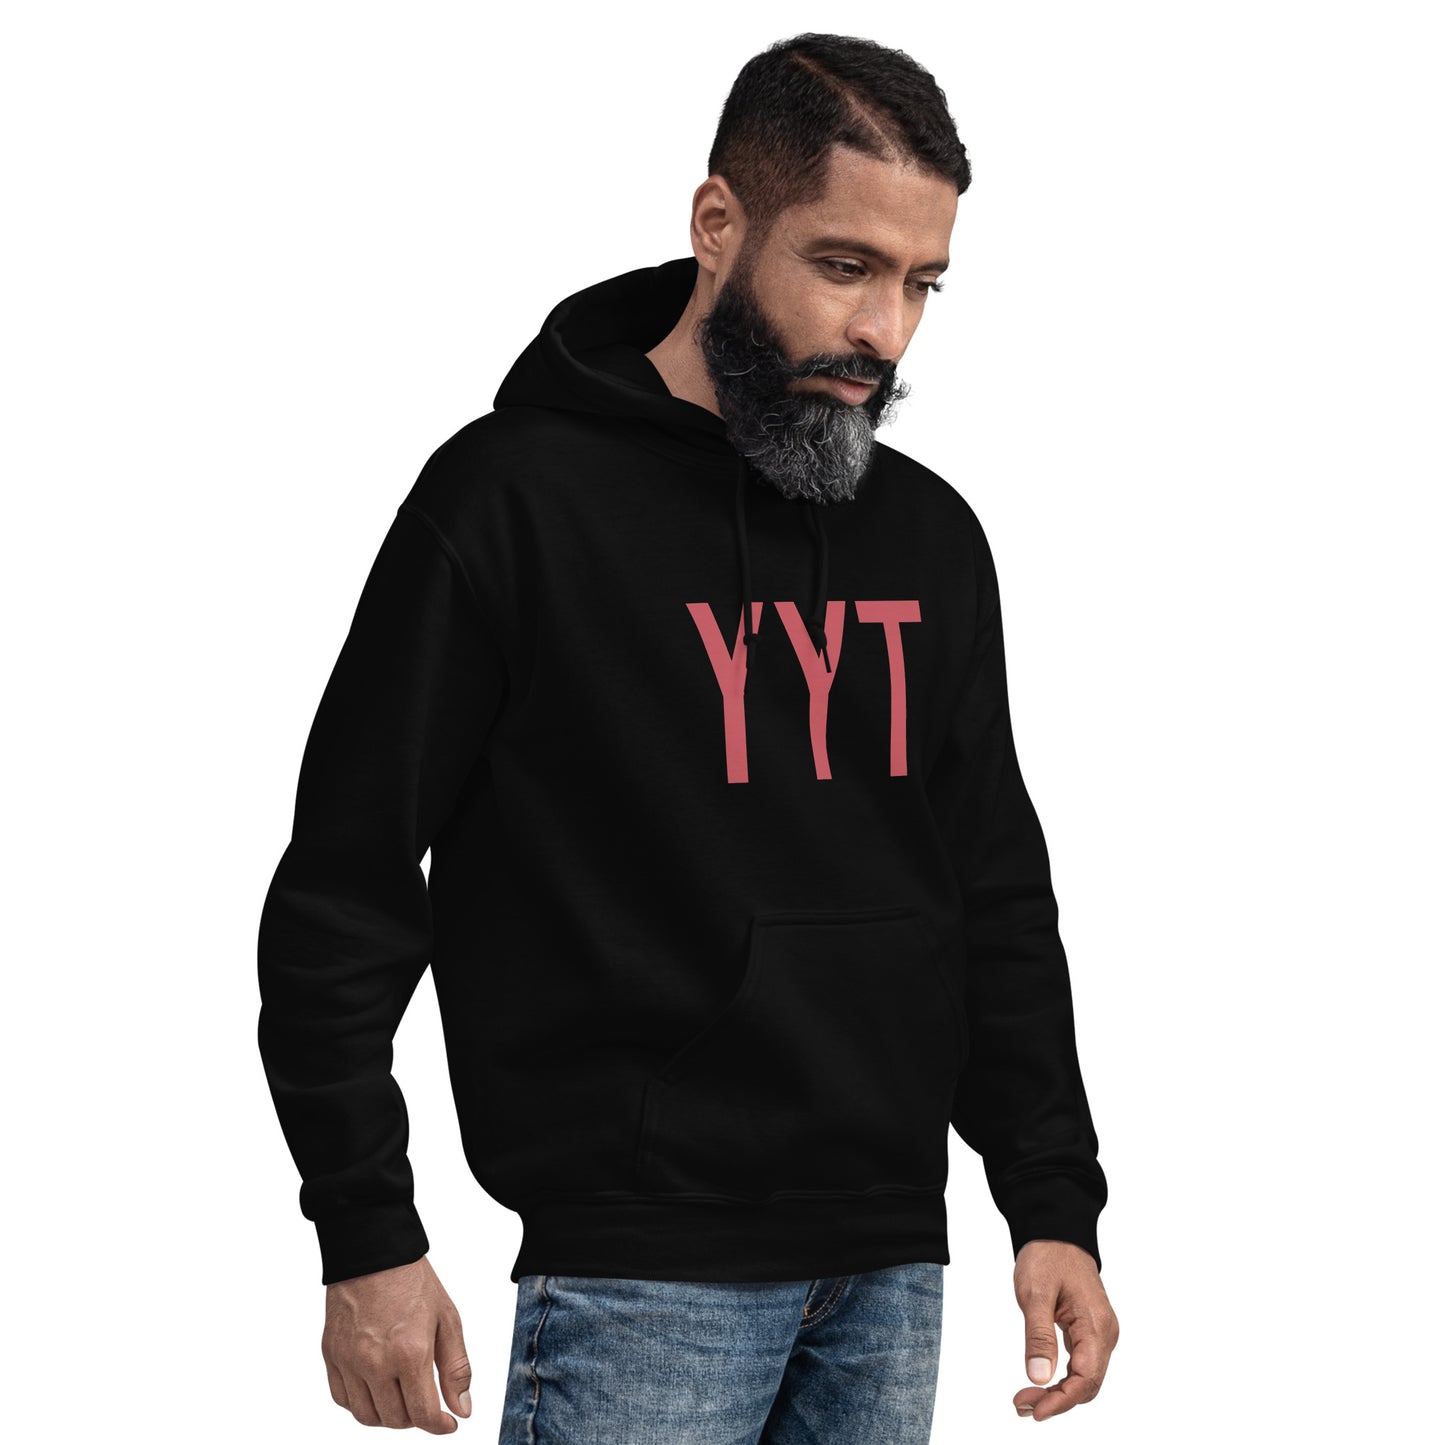 Aviation Enthusiast Hoodie - Deep Pink Graphic • YYT St. John's • YHM Designs - Image 06